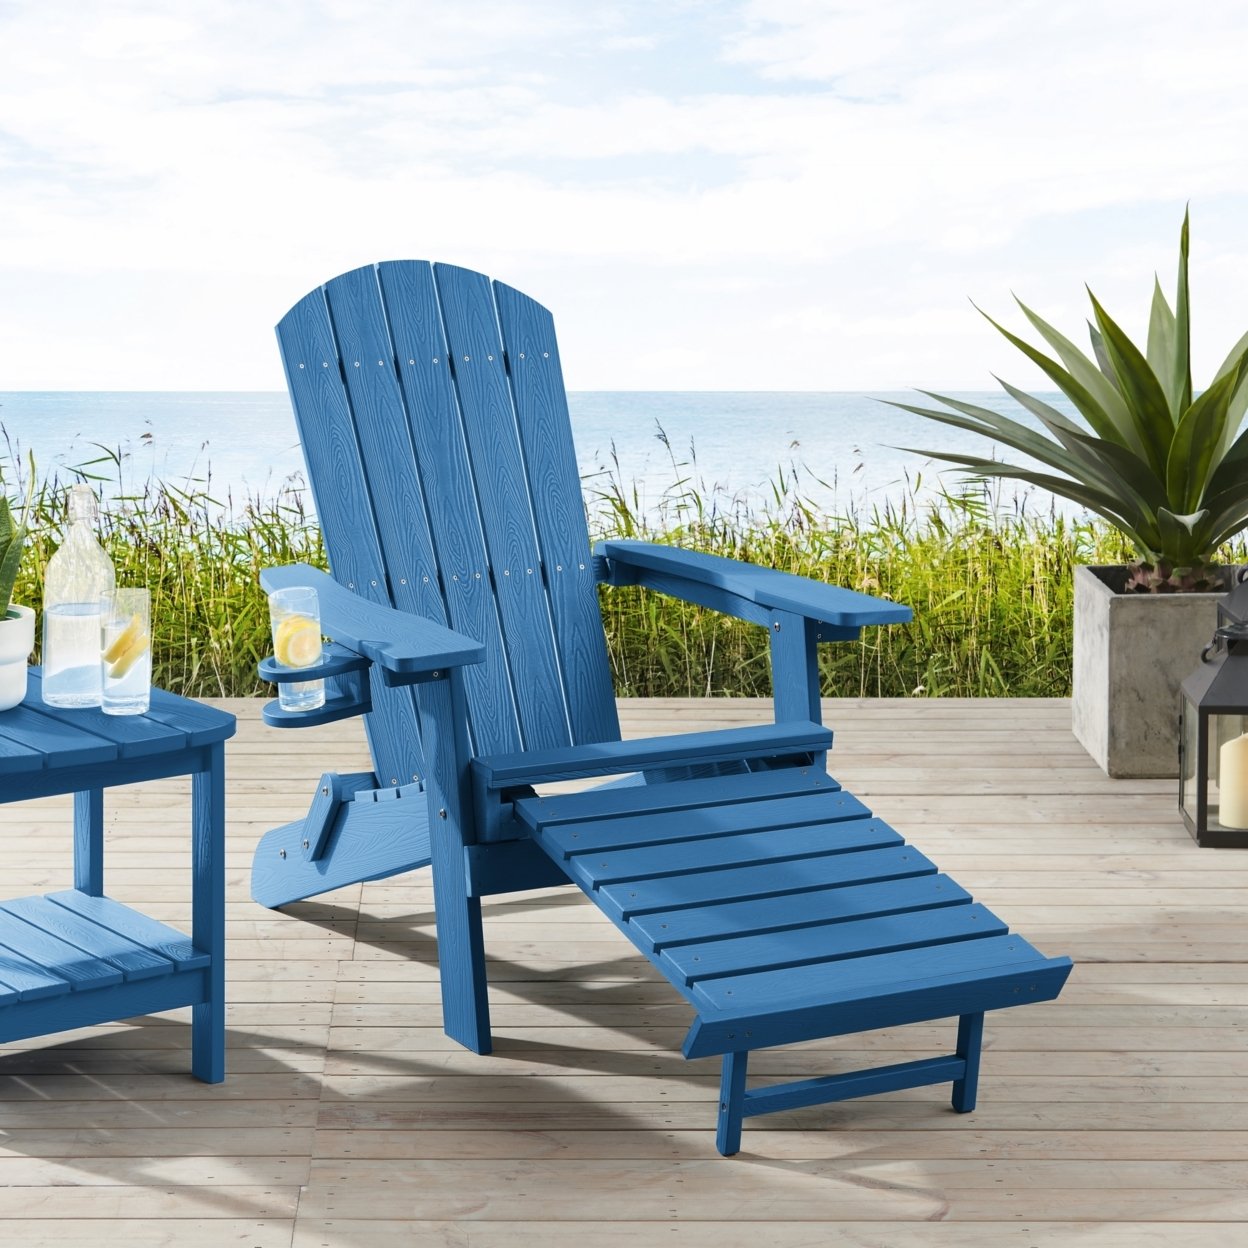 Rider Outdoor Adirondack Chair,Retractable/Pull-out Footrest, Cup Holder - Teal